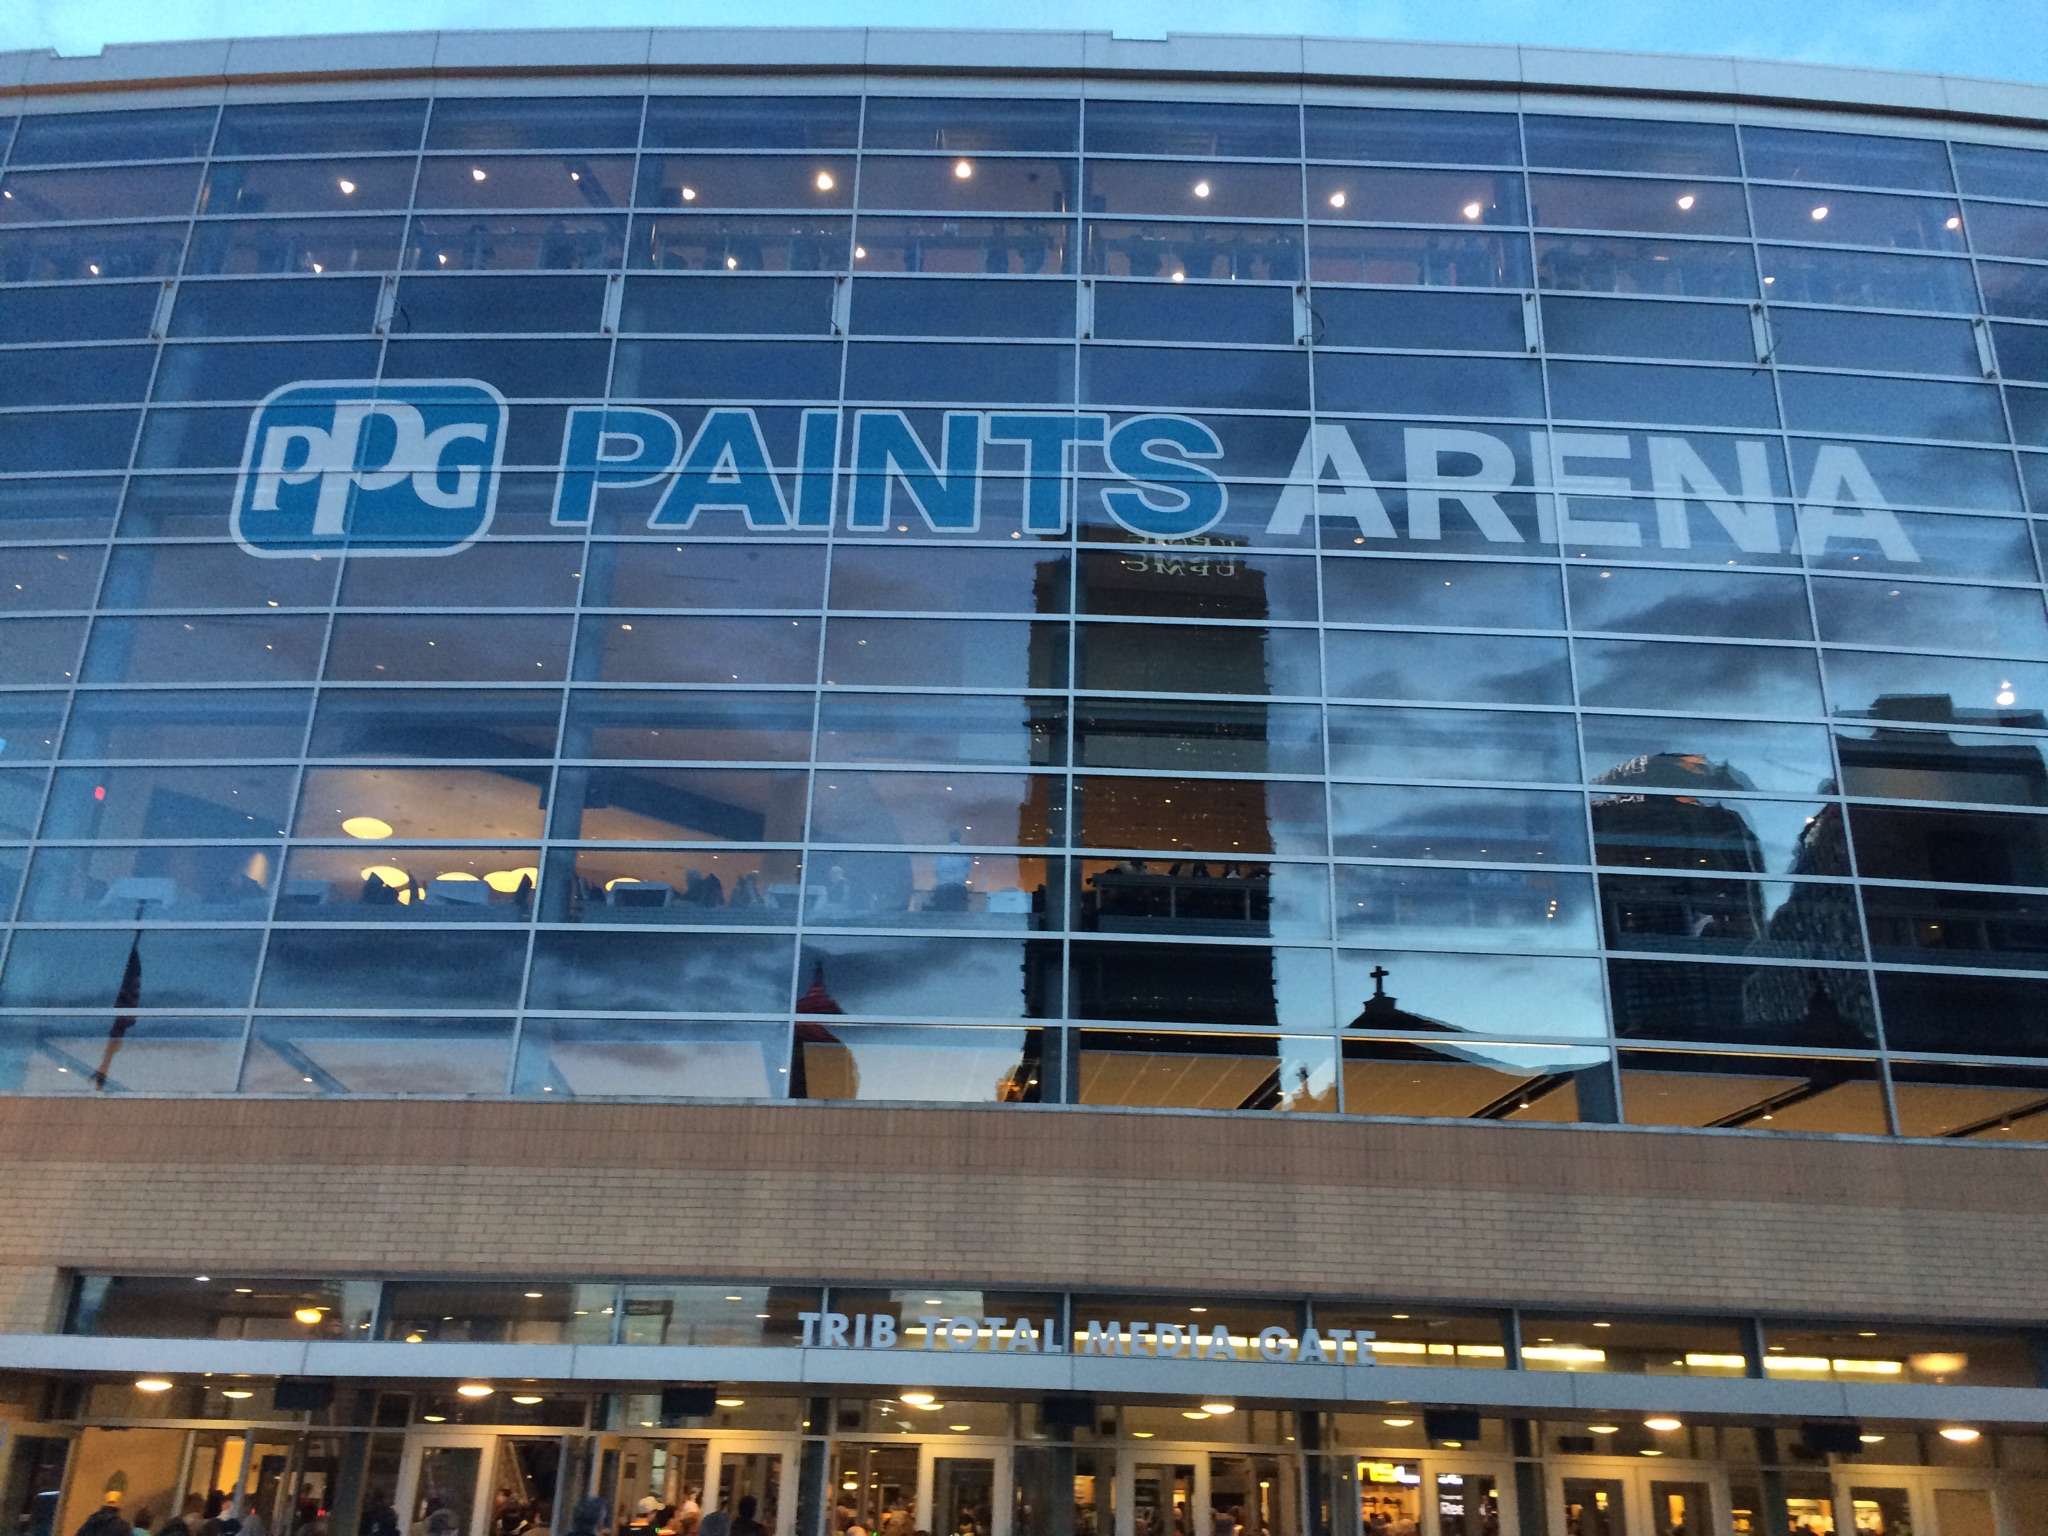 PPG Paints Arena: Ultimate Gate & Entrance Guide for Visitors - The  Stadiums Guide